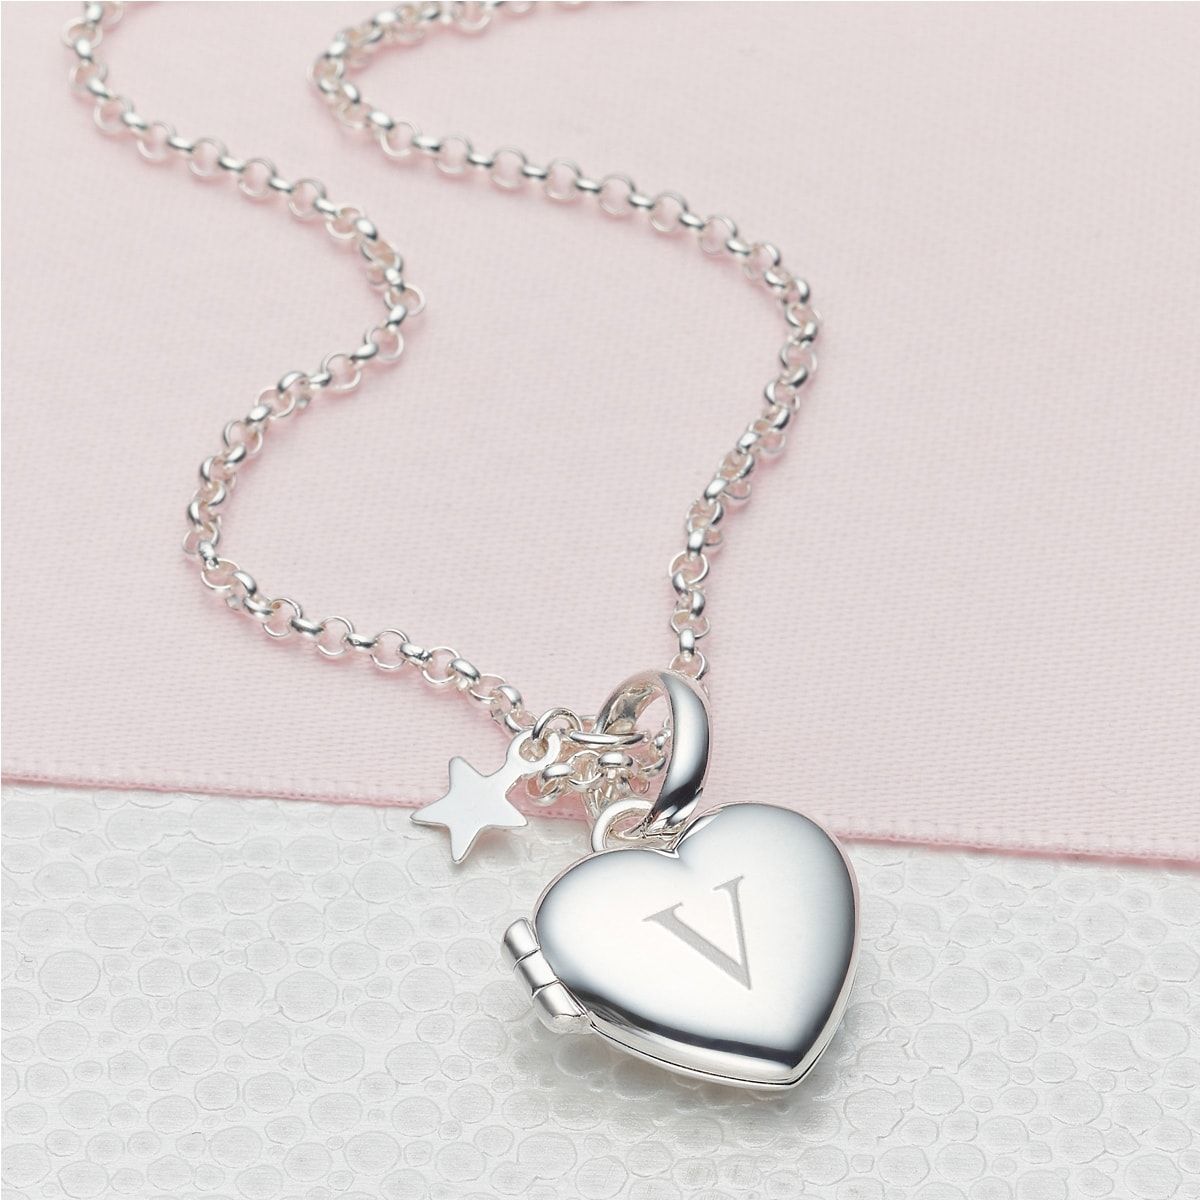 Personalized Small Heart Locket Necklace